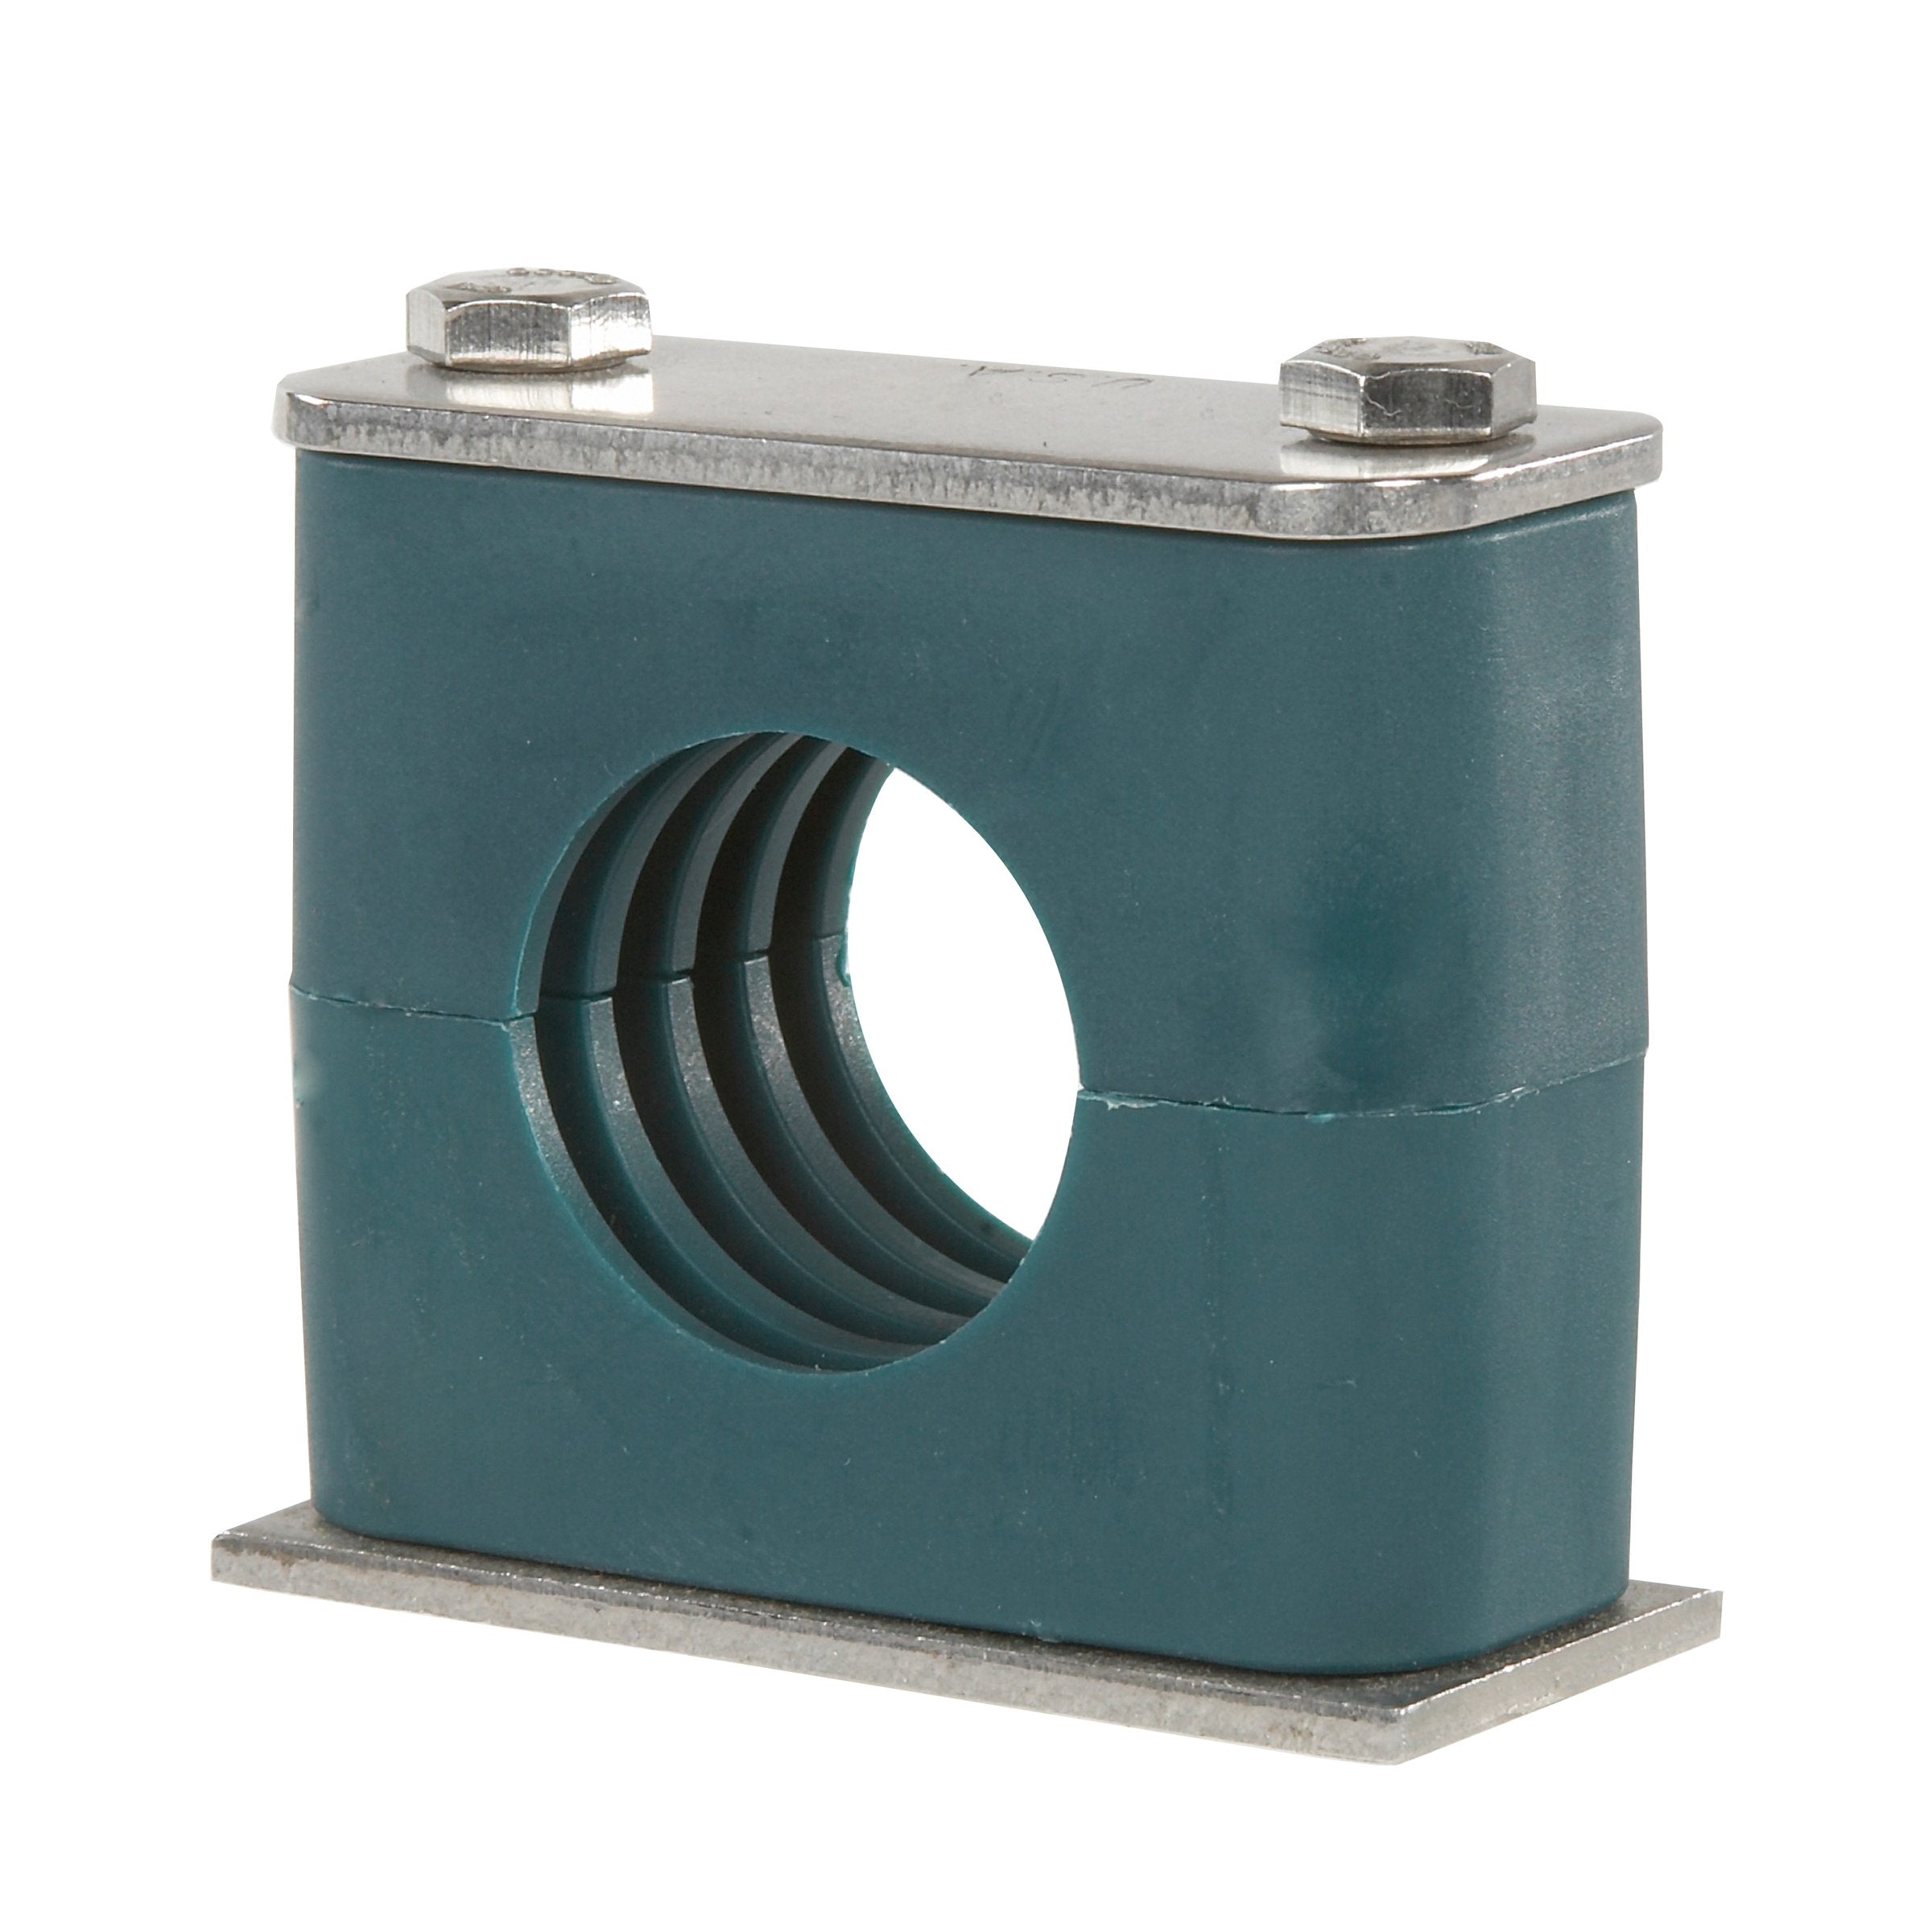 SP-109.5-PP-DP-AS-U-W10 : Stauff Clamp, Single Weld Plate, 0.375 inch (9.5mm) OD, for 3/8" Tube, Green PP Insert, Profiled Interior, Carbon Steel